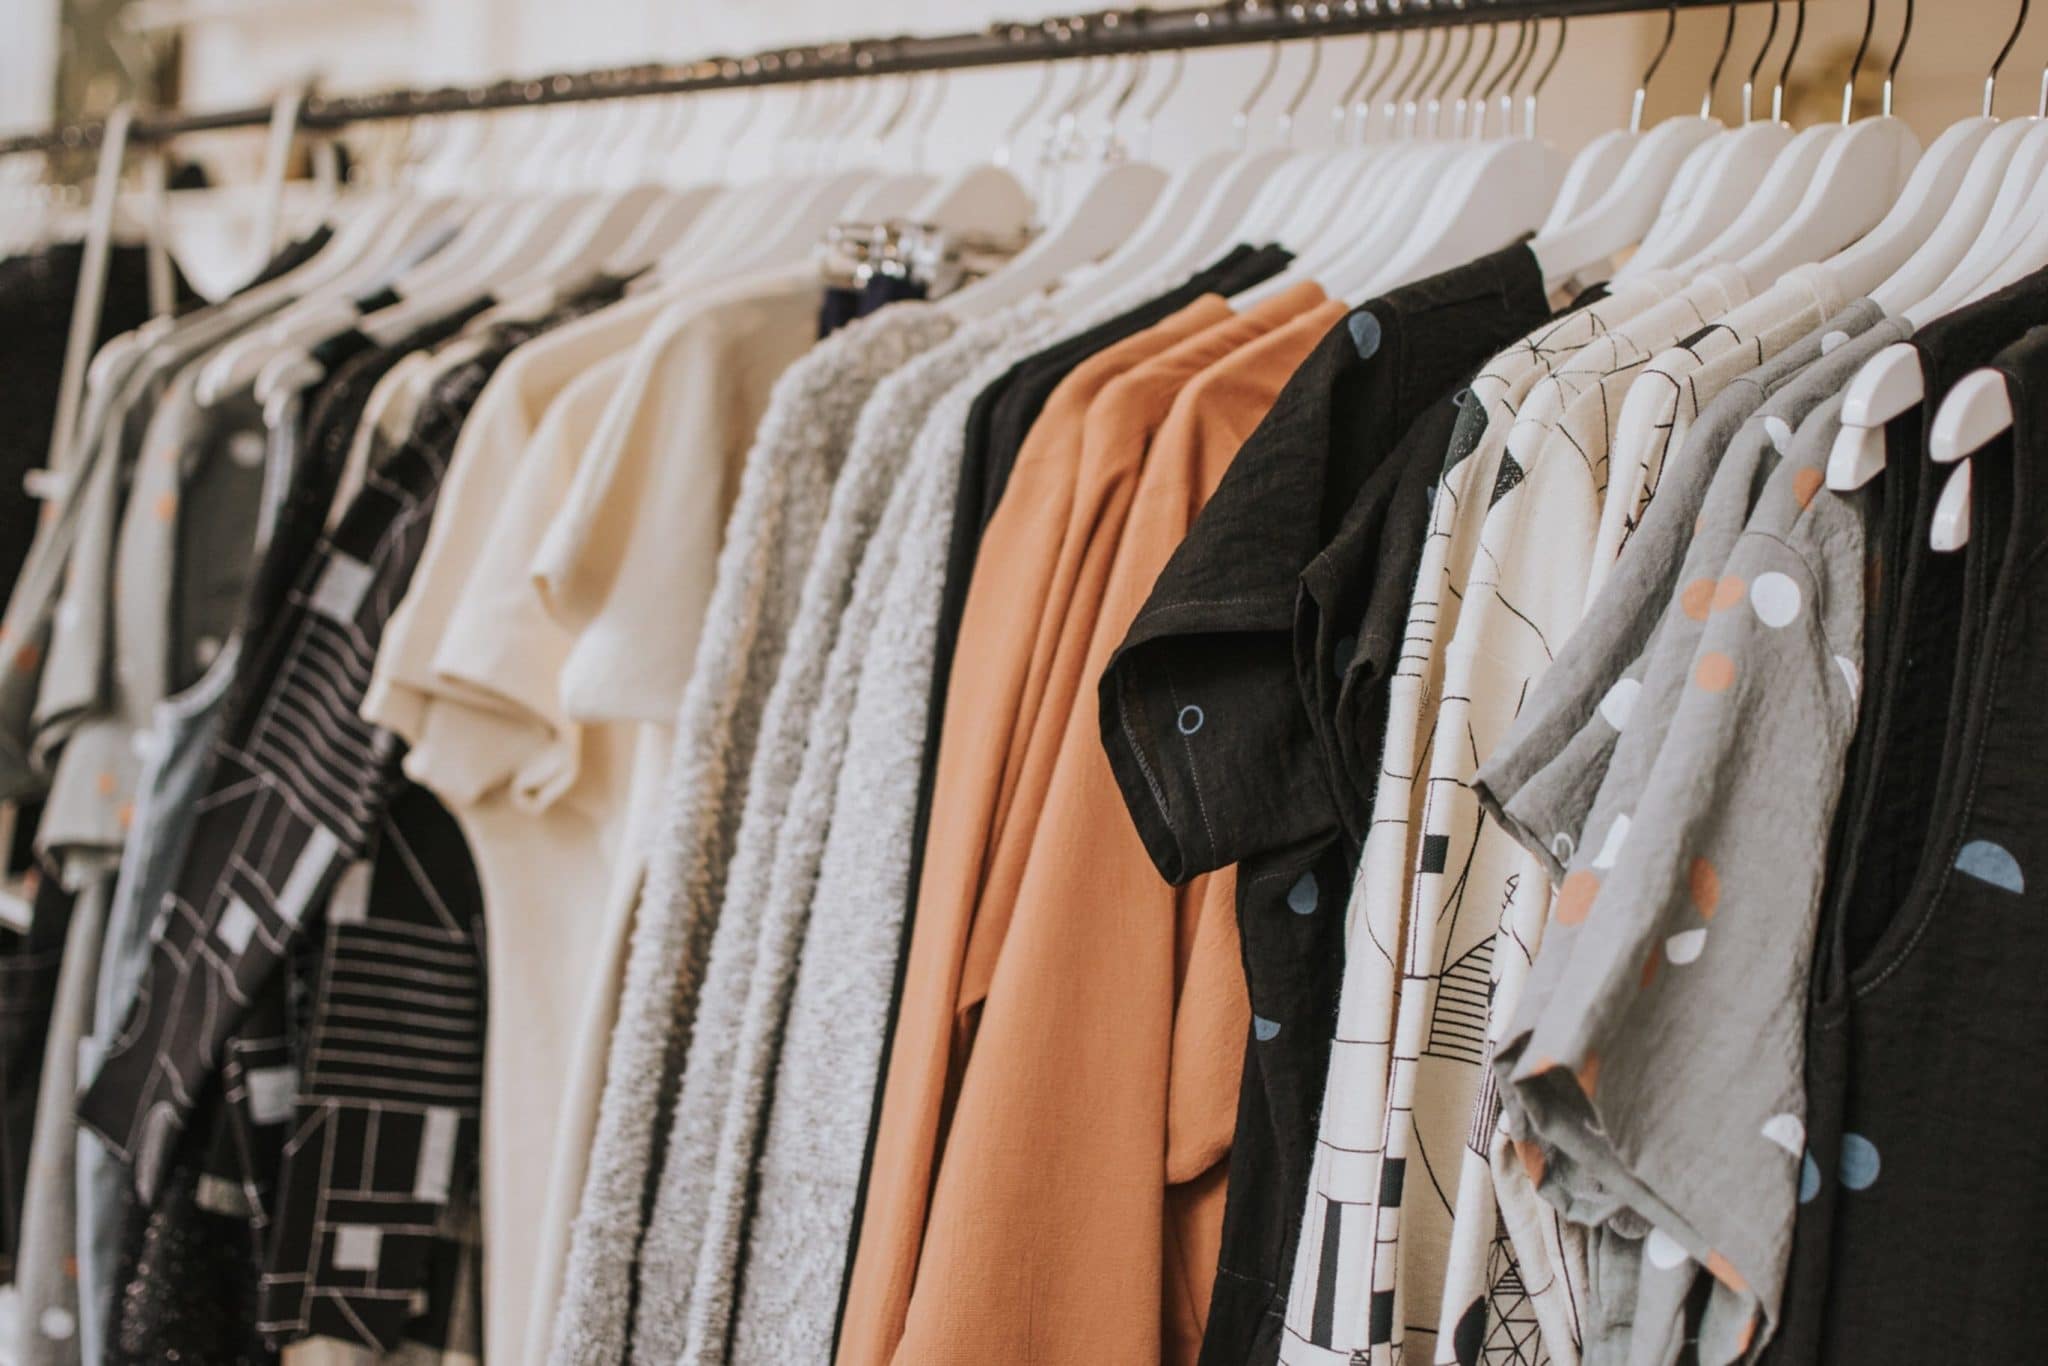 renting clothing future of ethical fashion